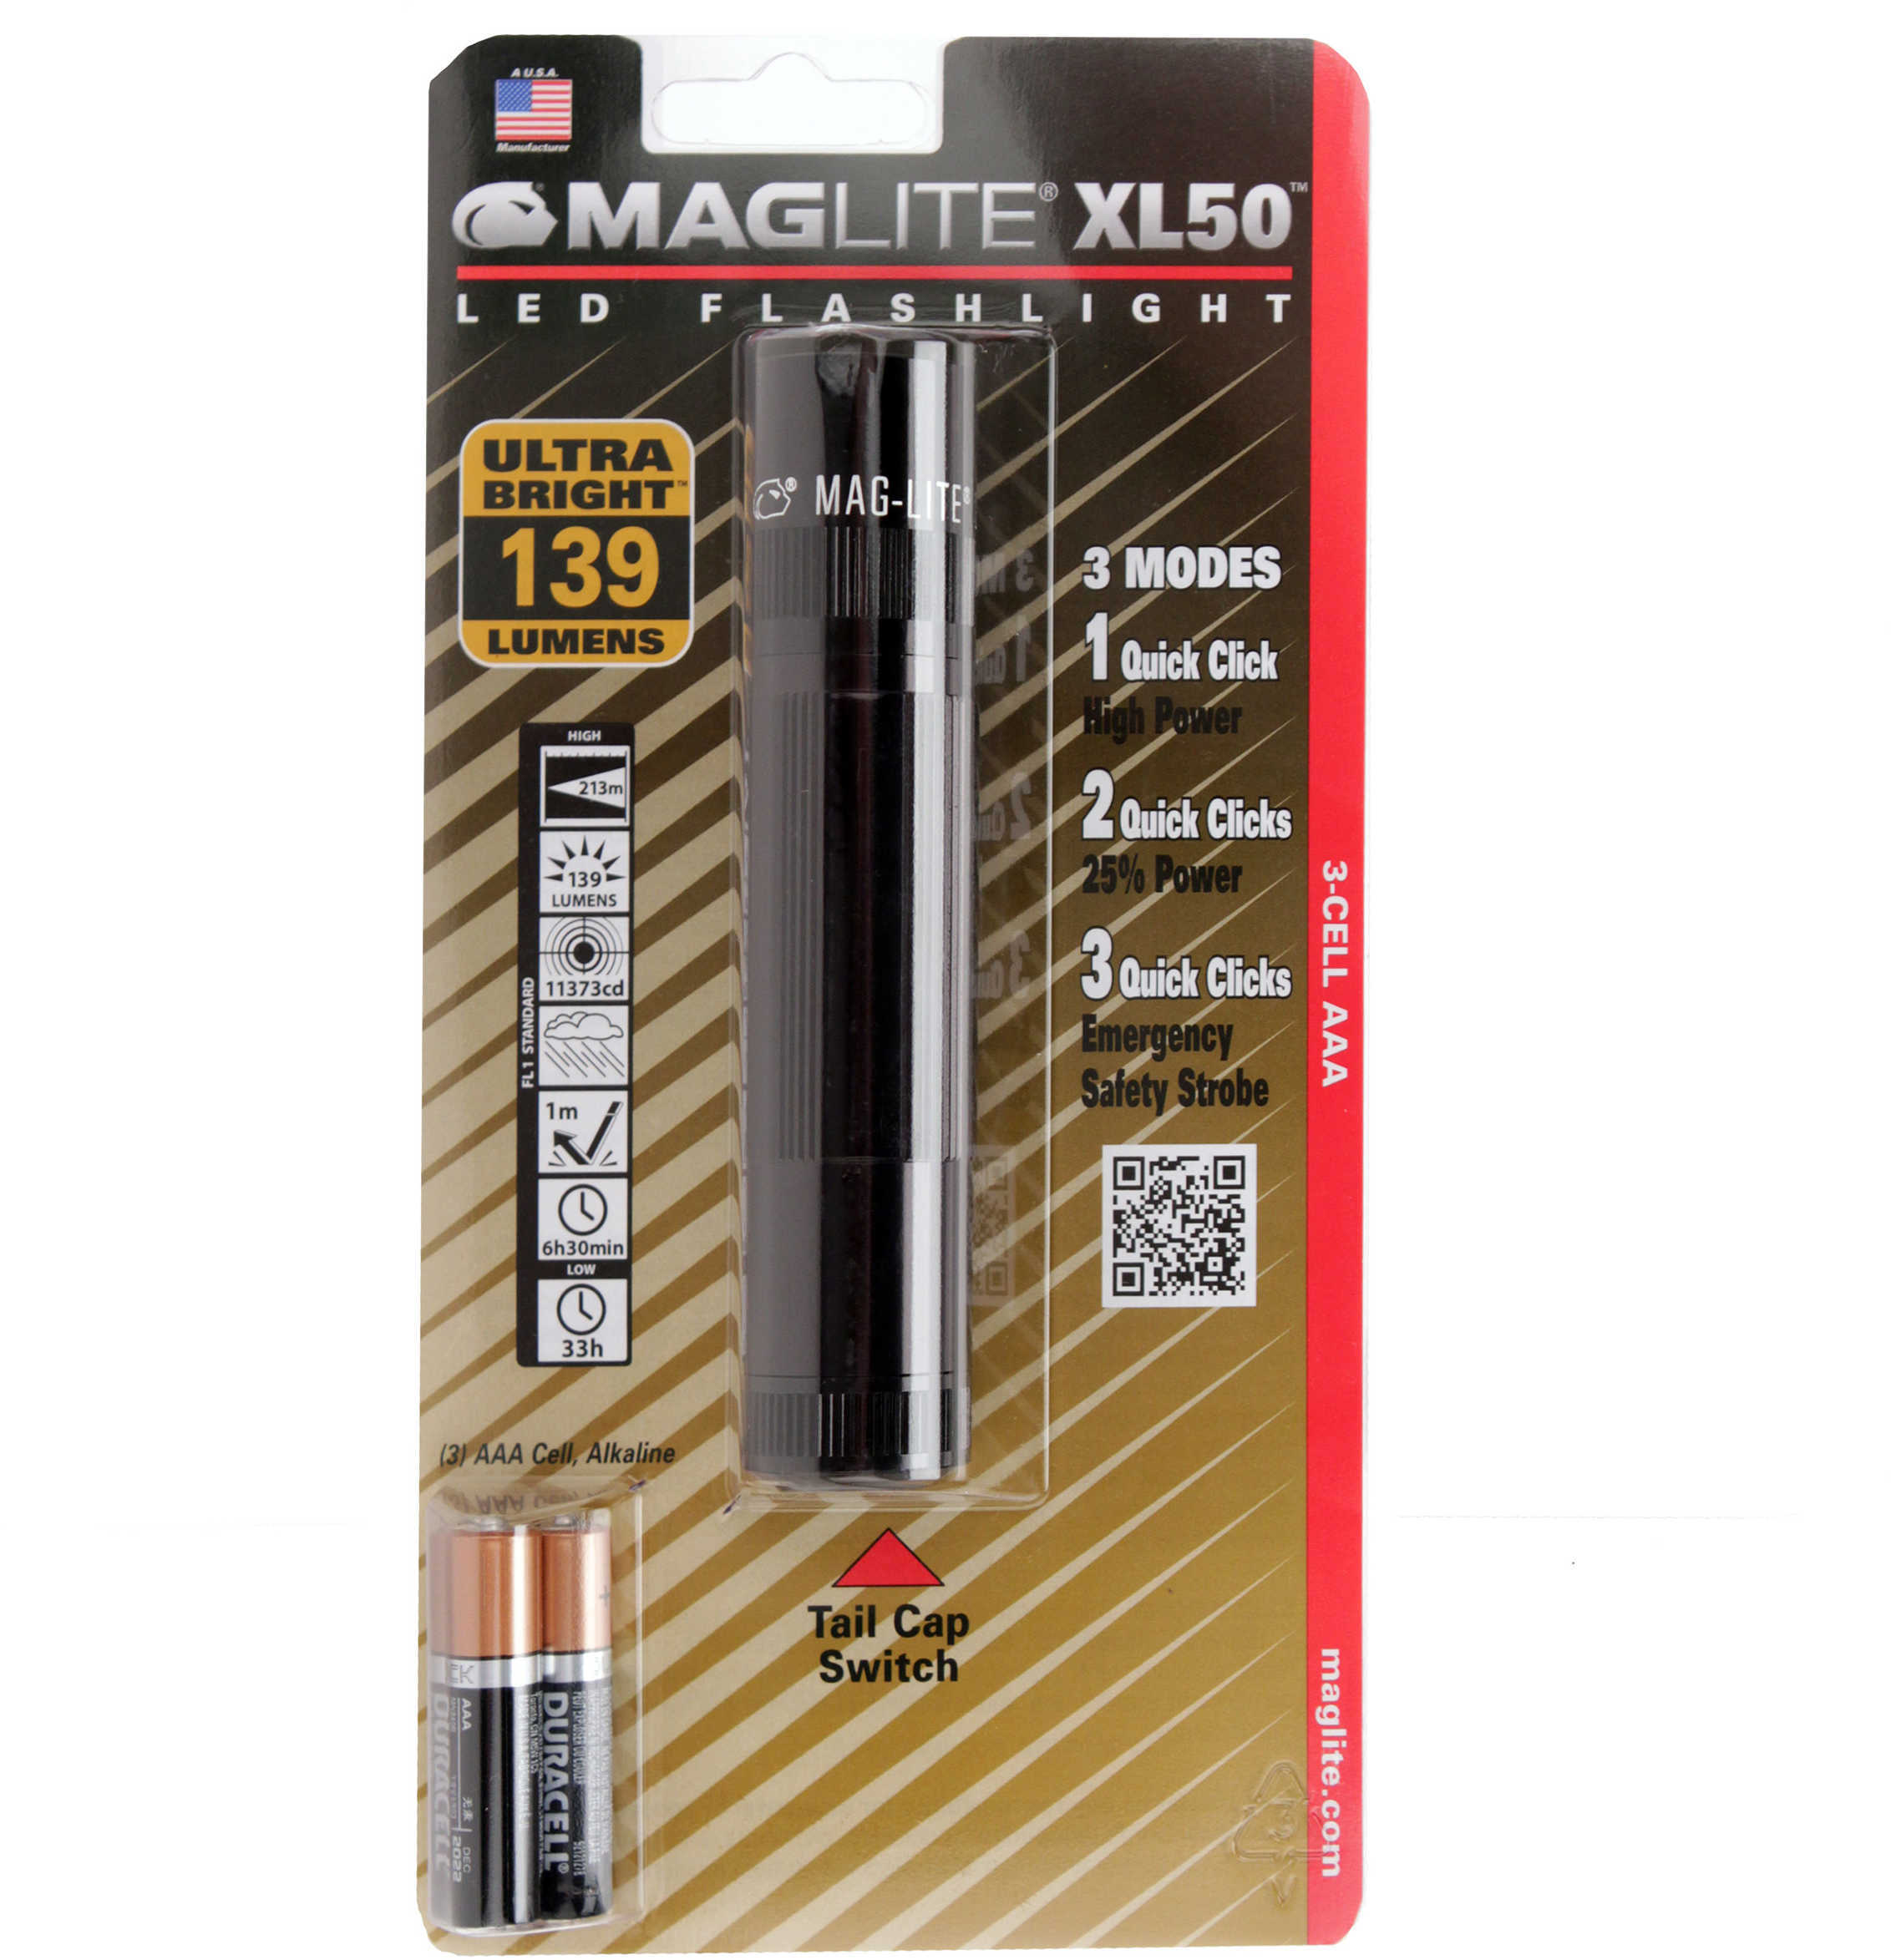 Mag Xl50 Led Flashlight Black - Blister Pack 3-Mode "Spot-To-Flood" Adjustable Beam Anodized For Corrosion